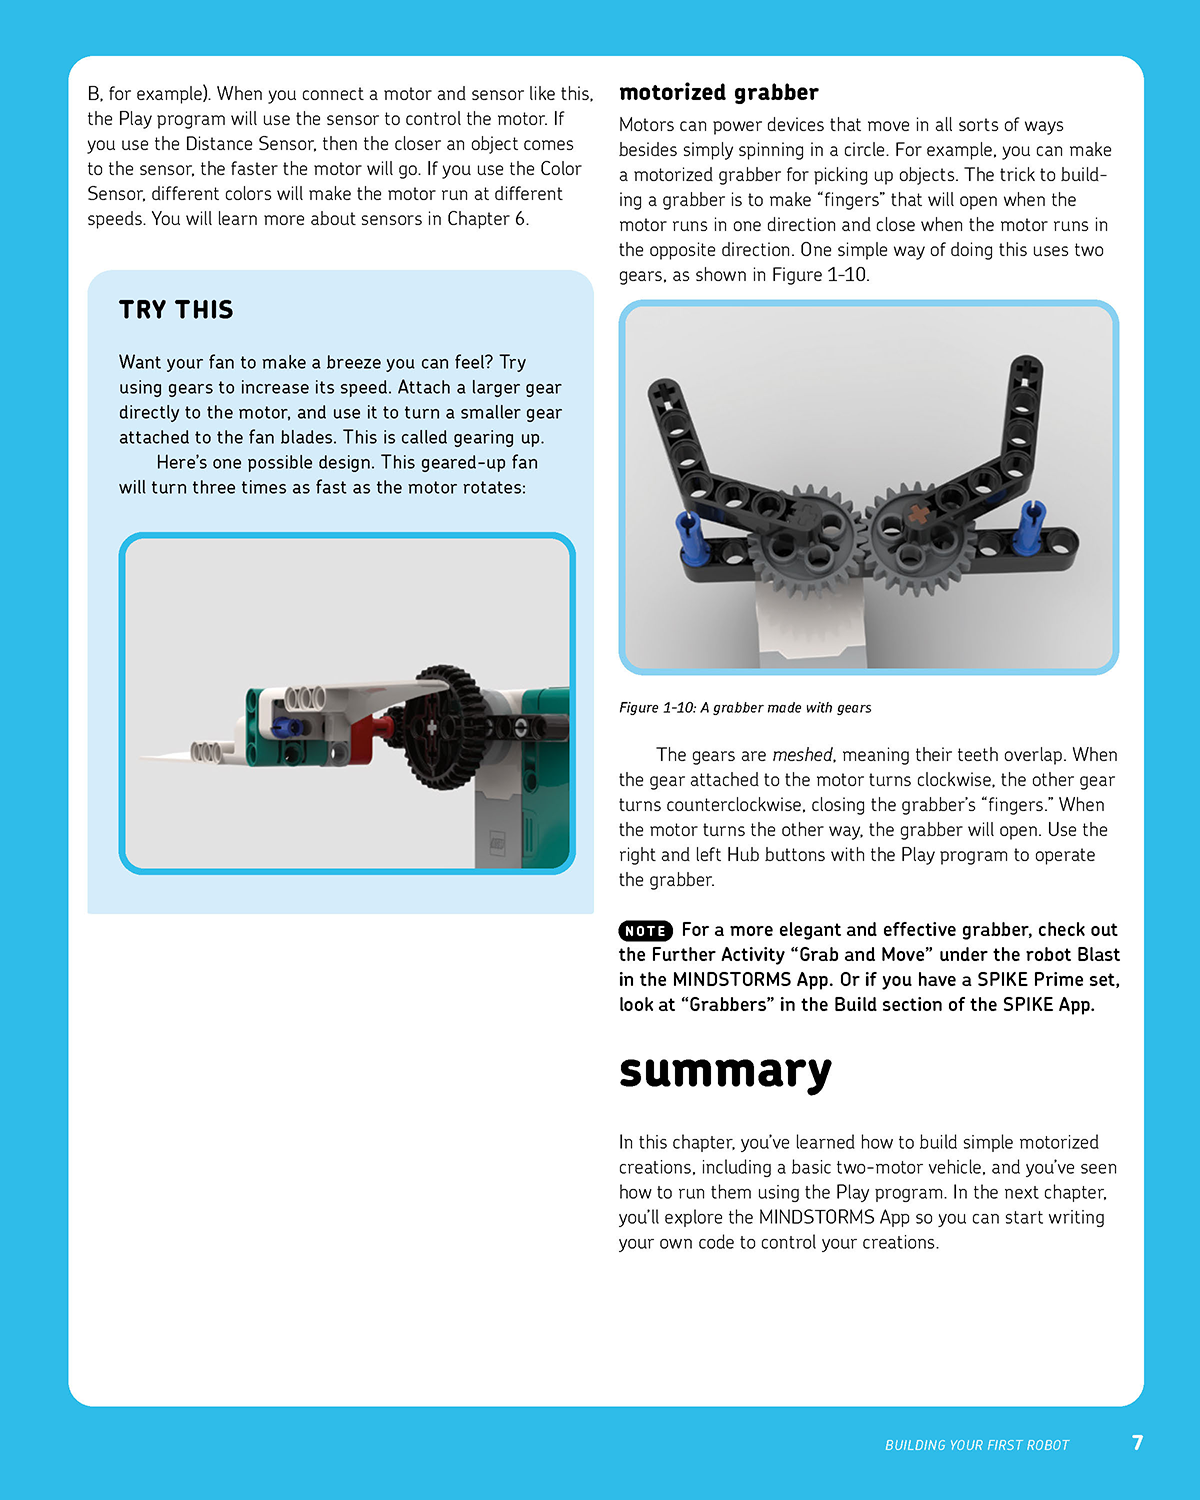 Getting started with LEGO robotics a Mindstorms user guide - photo 24